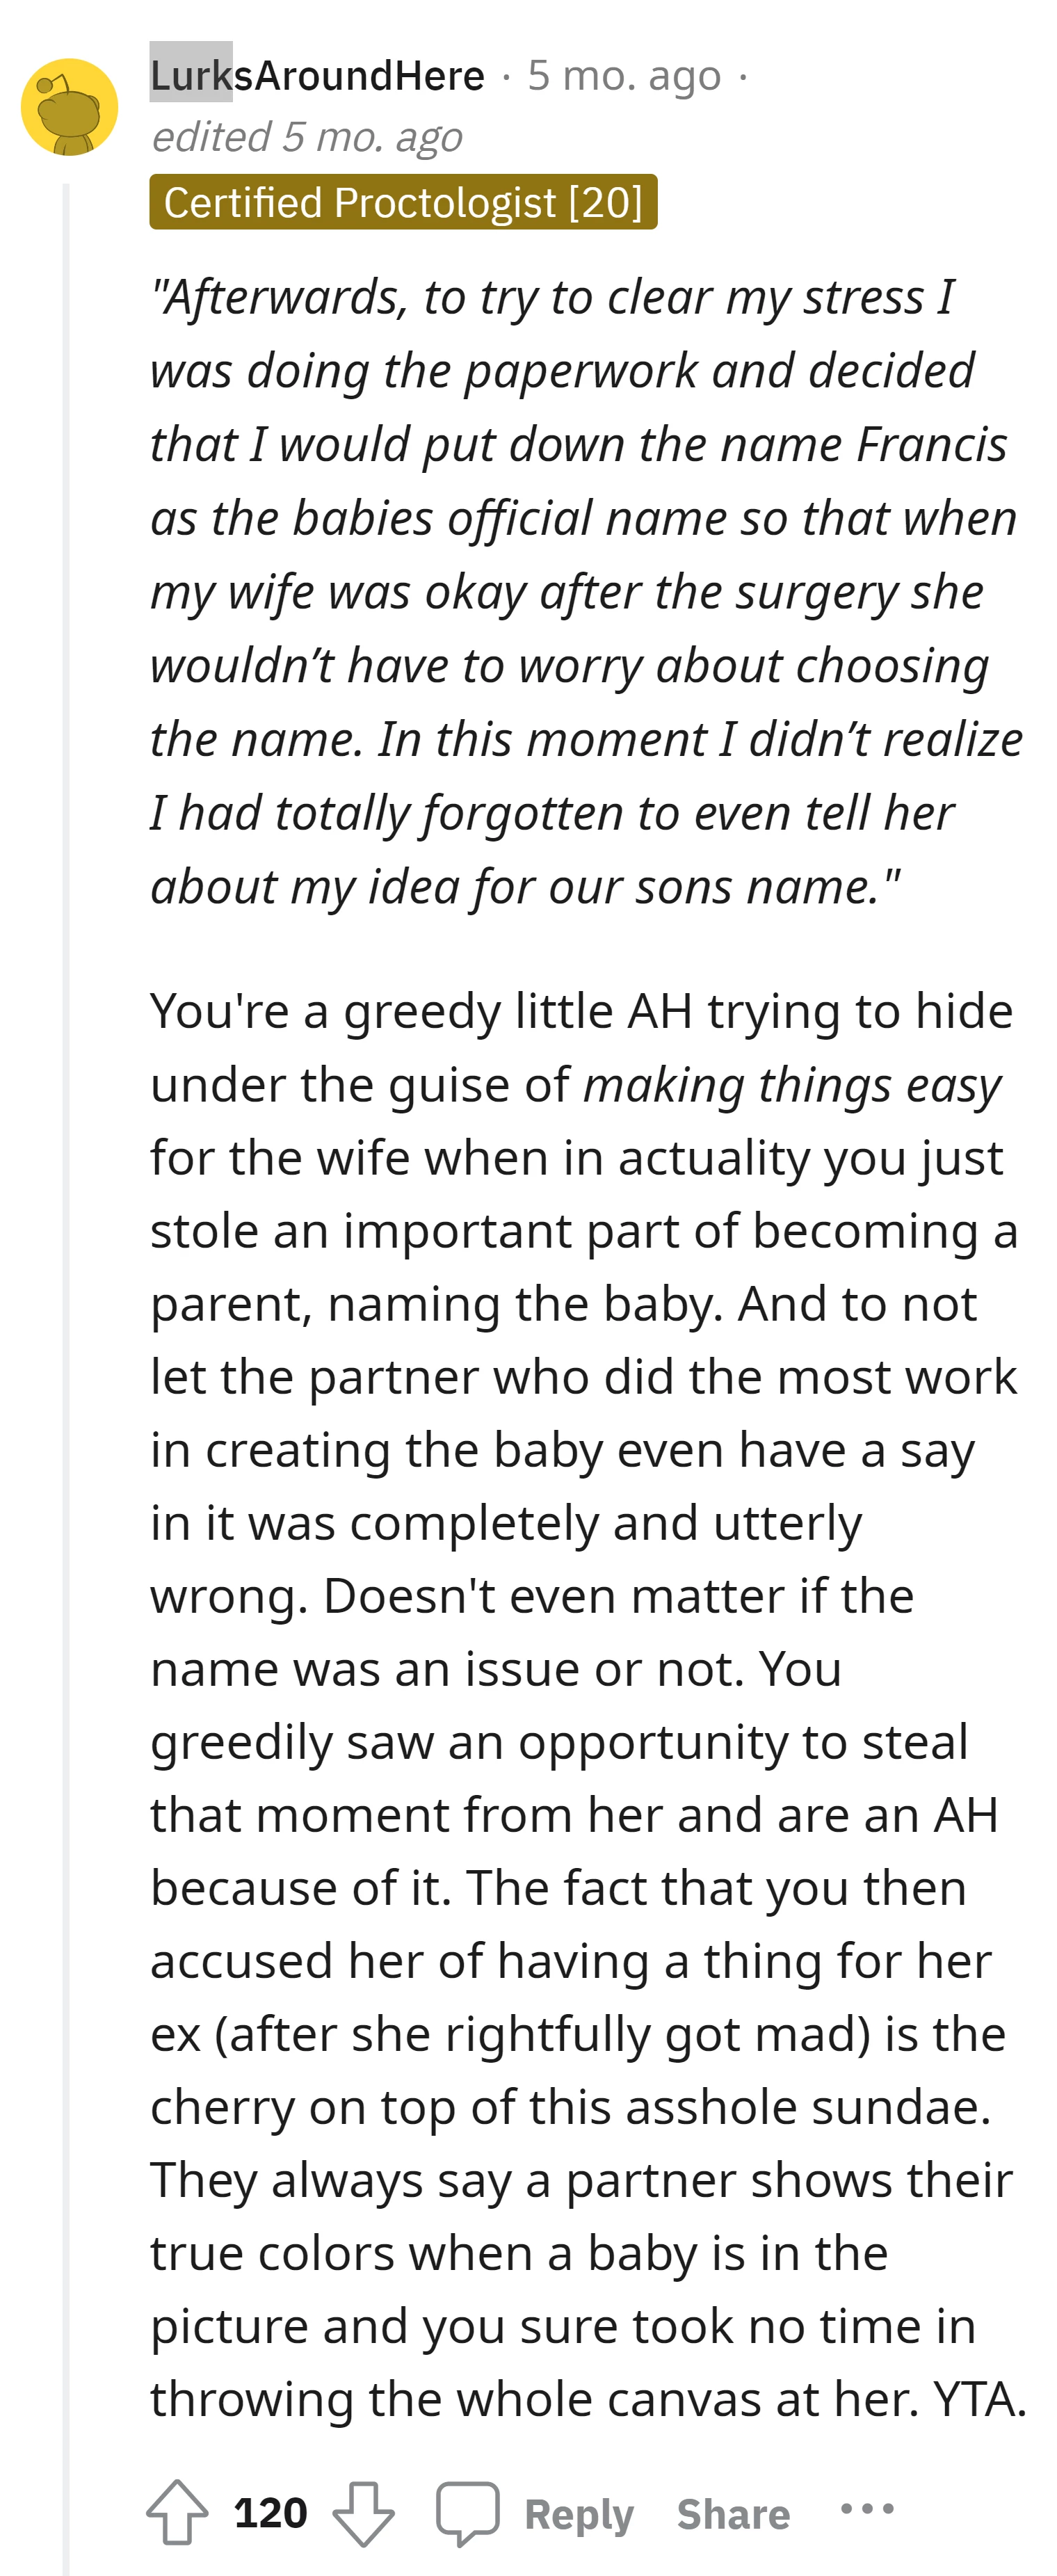 Commenter criticizes OP for selfishly taking away the important decision of naming the baby from his wife